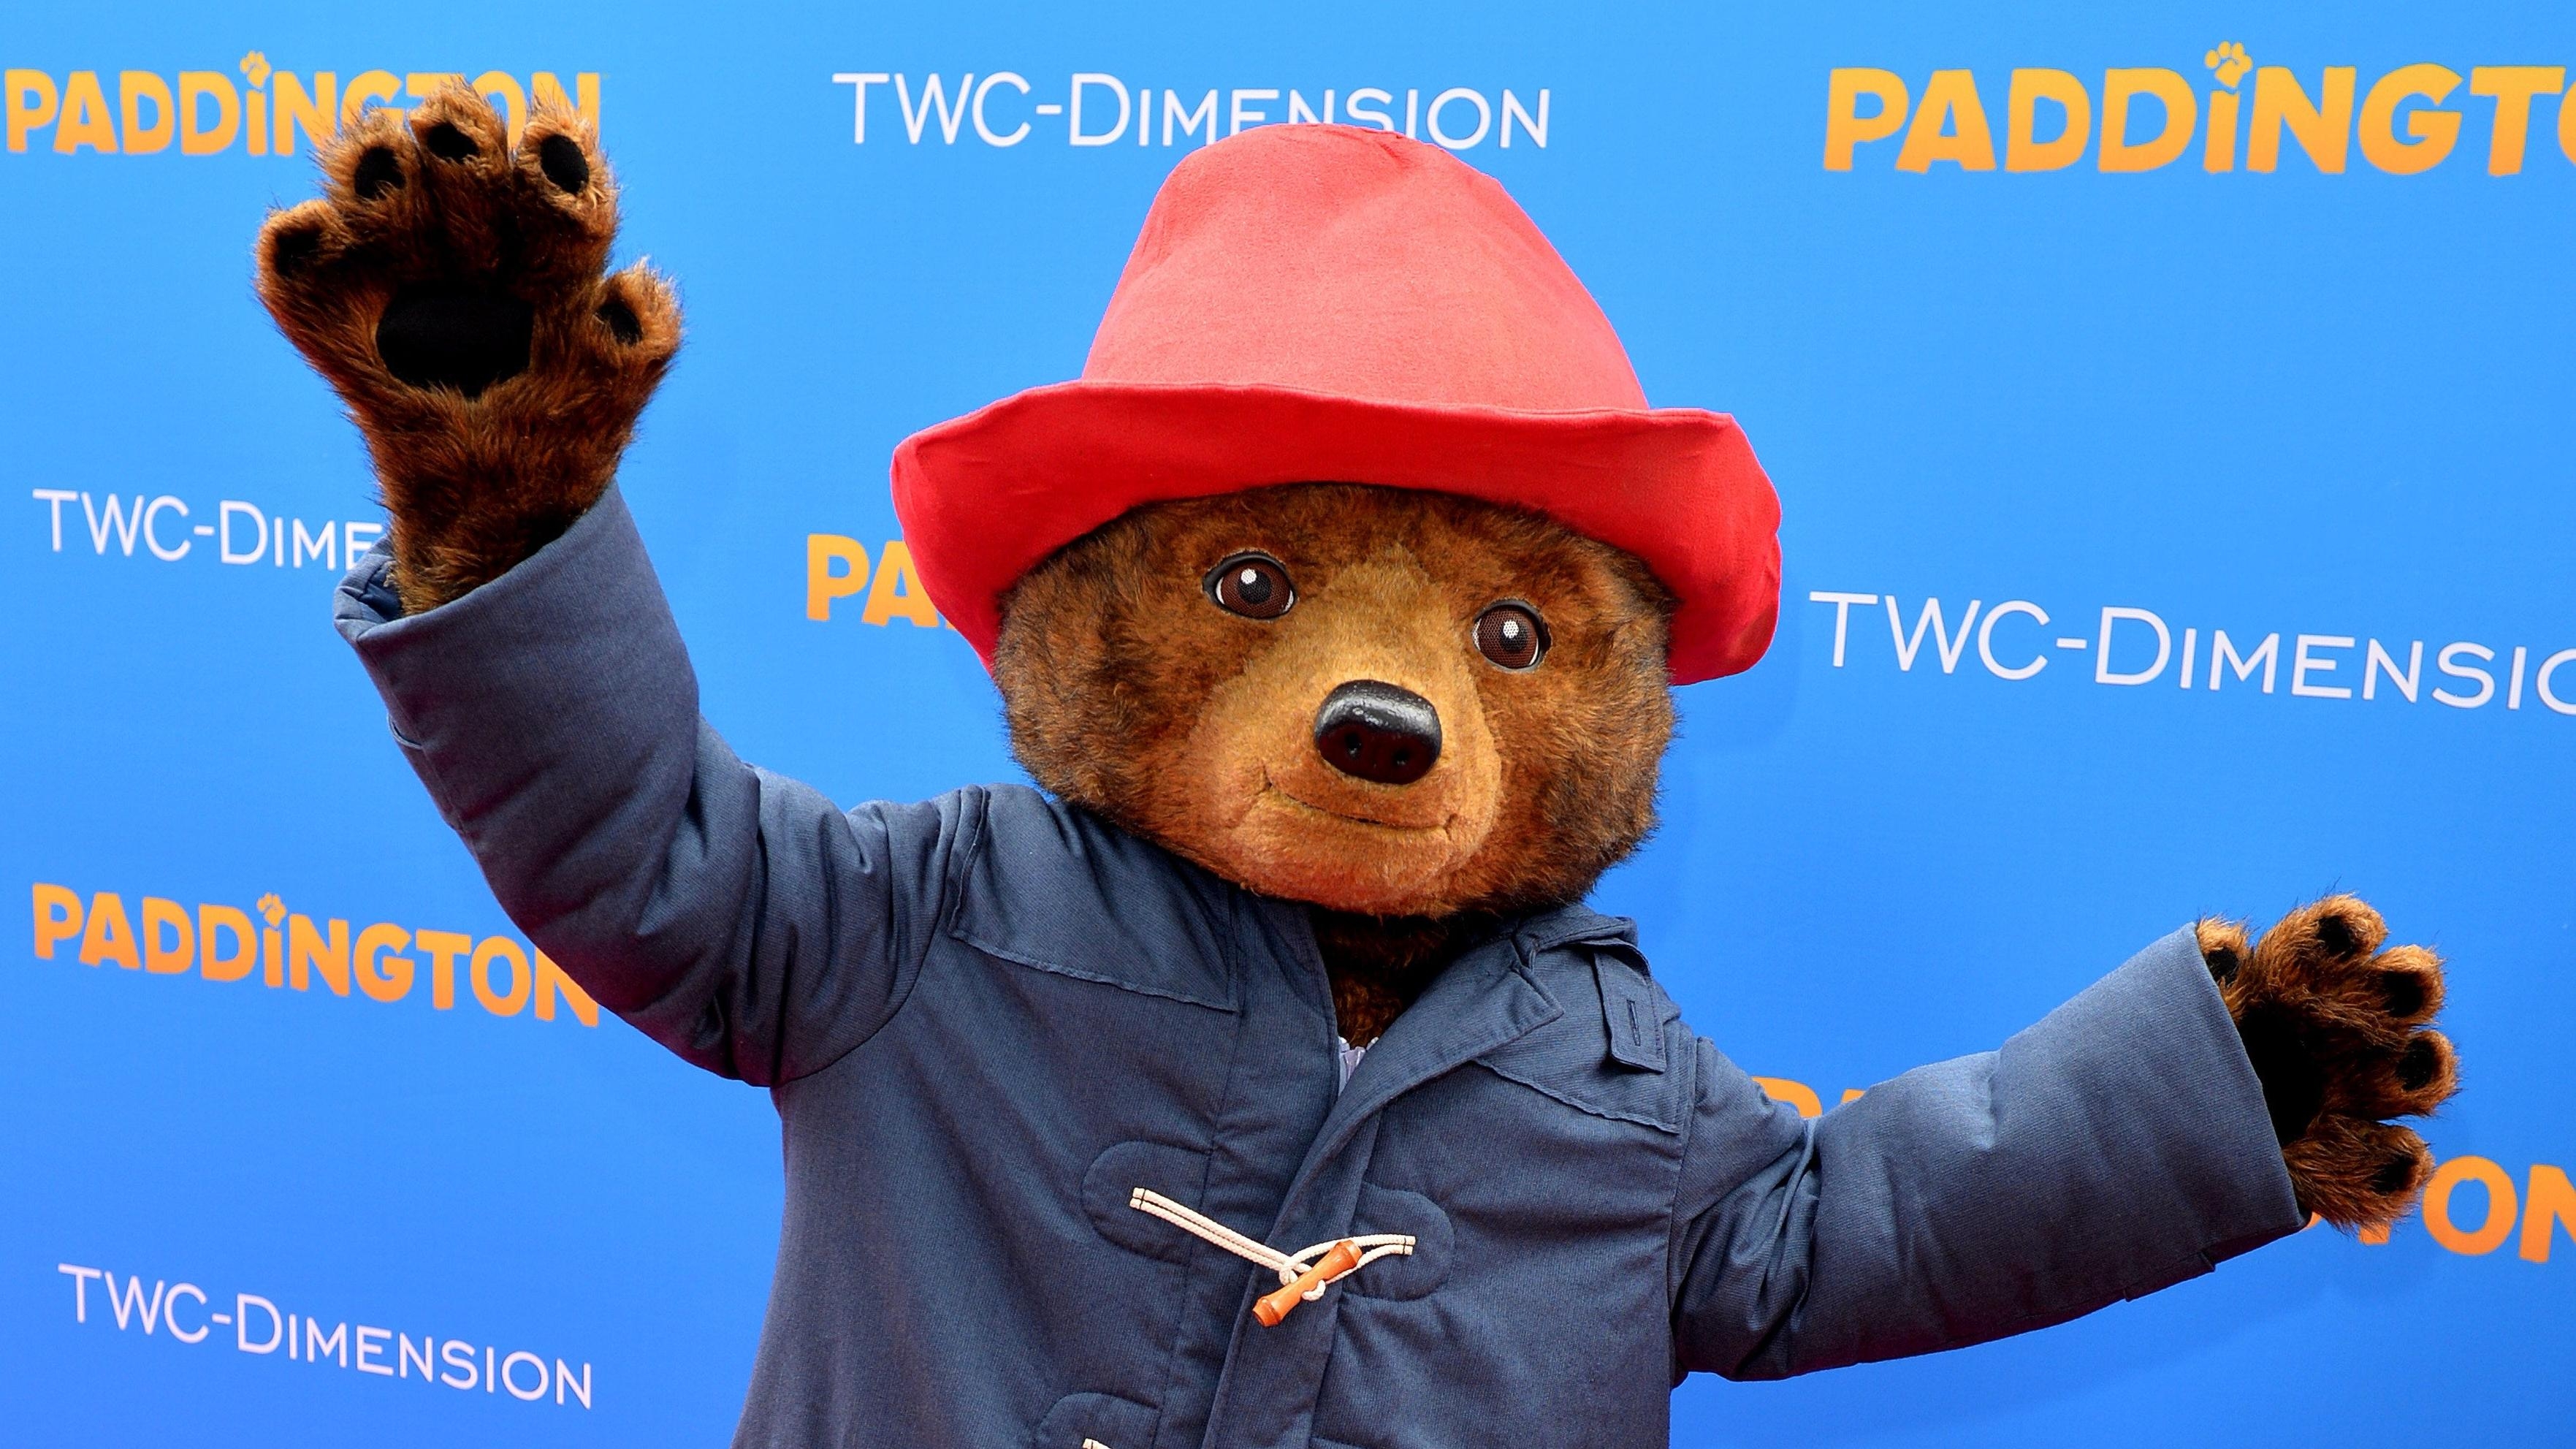 Paddington 3 gets an official title and a new director